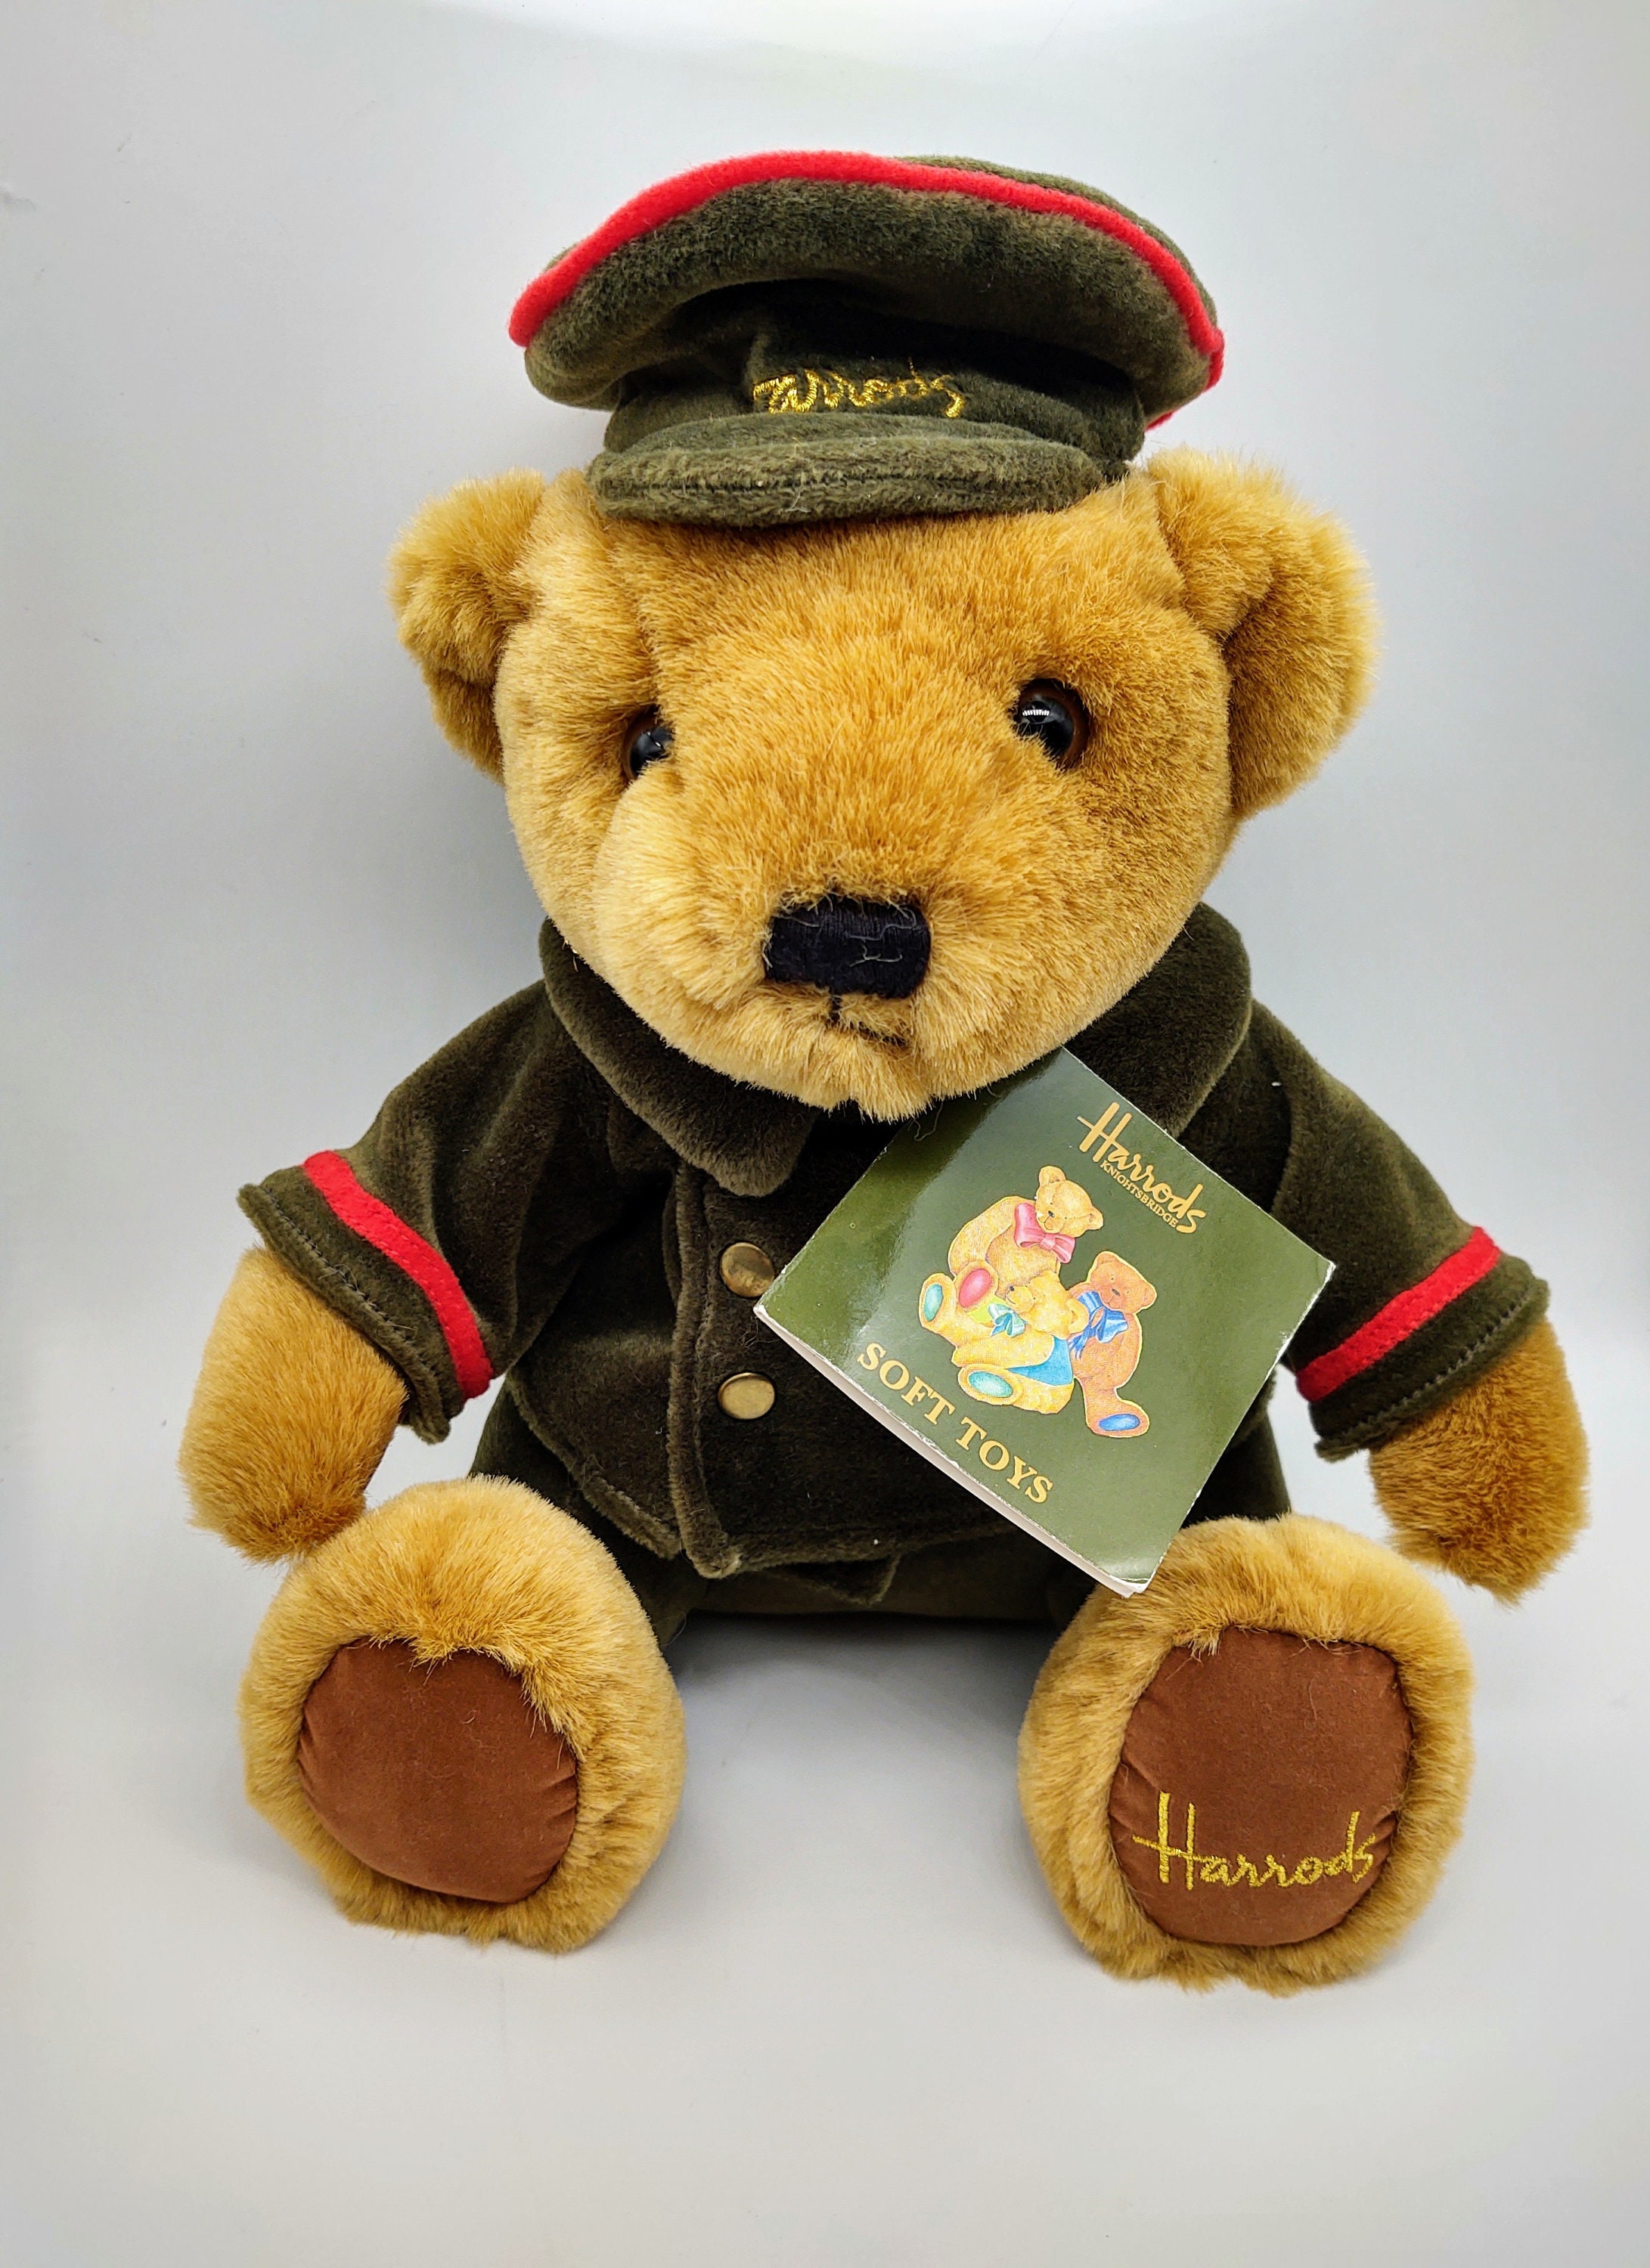 Vintage 90s limited edition Harrods Bear with original clothing and label Very 